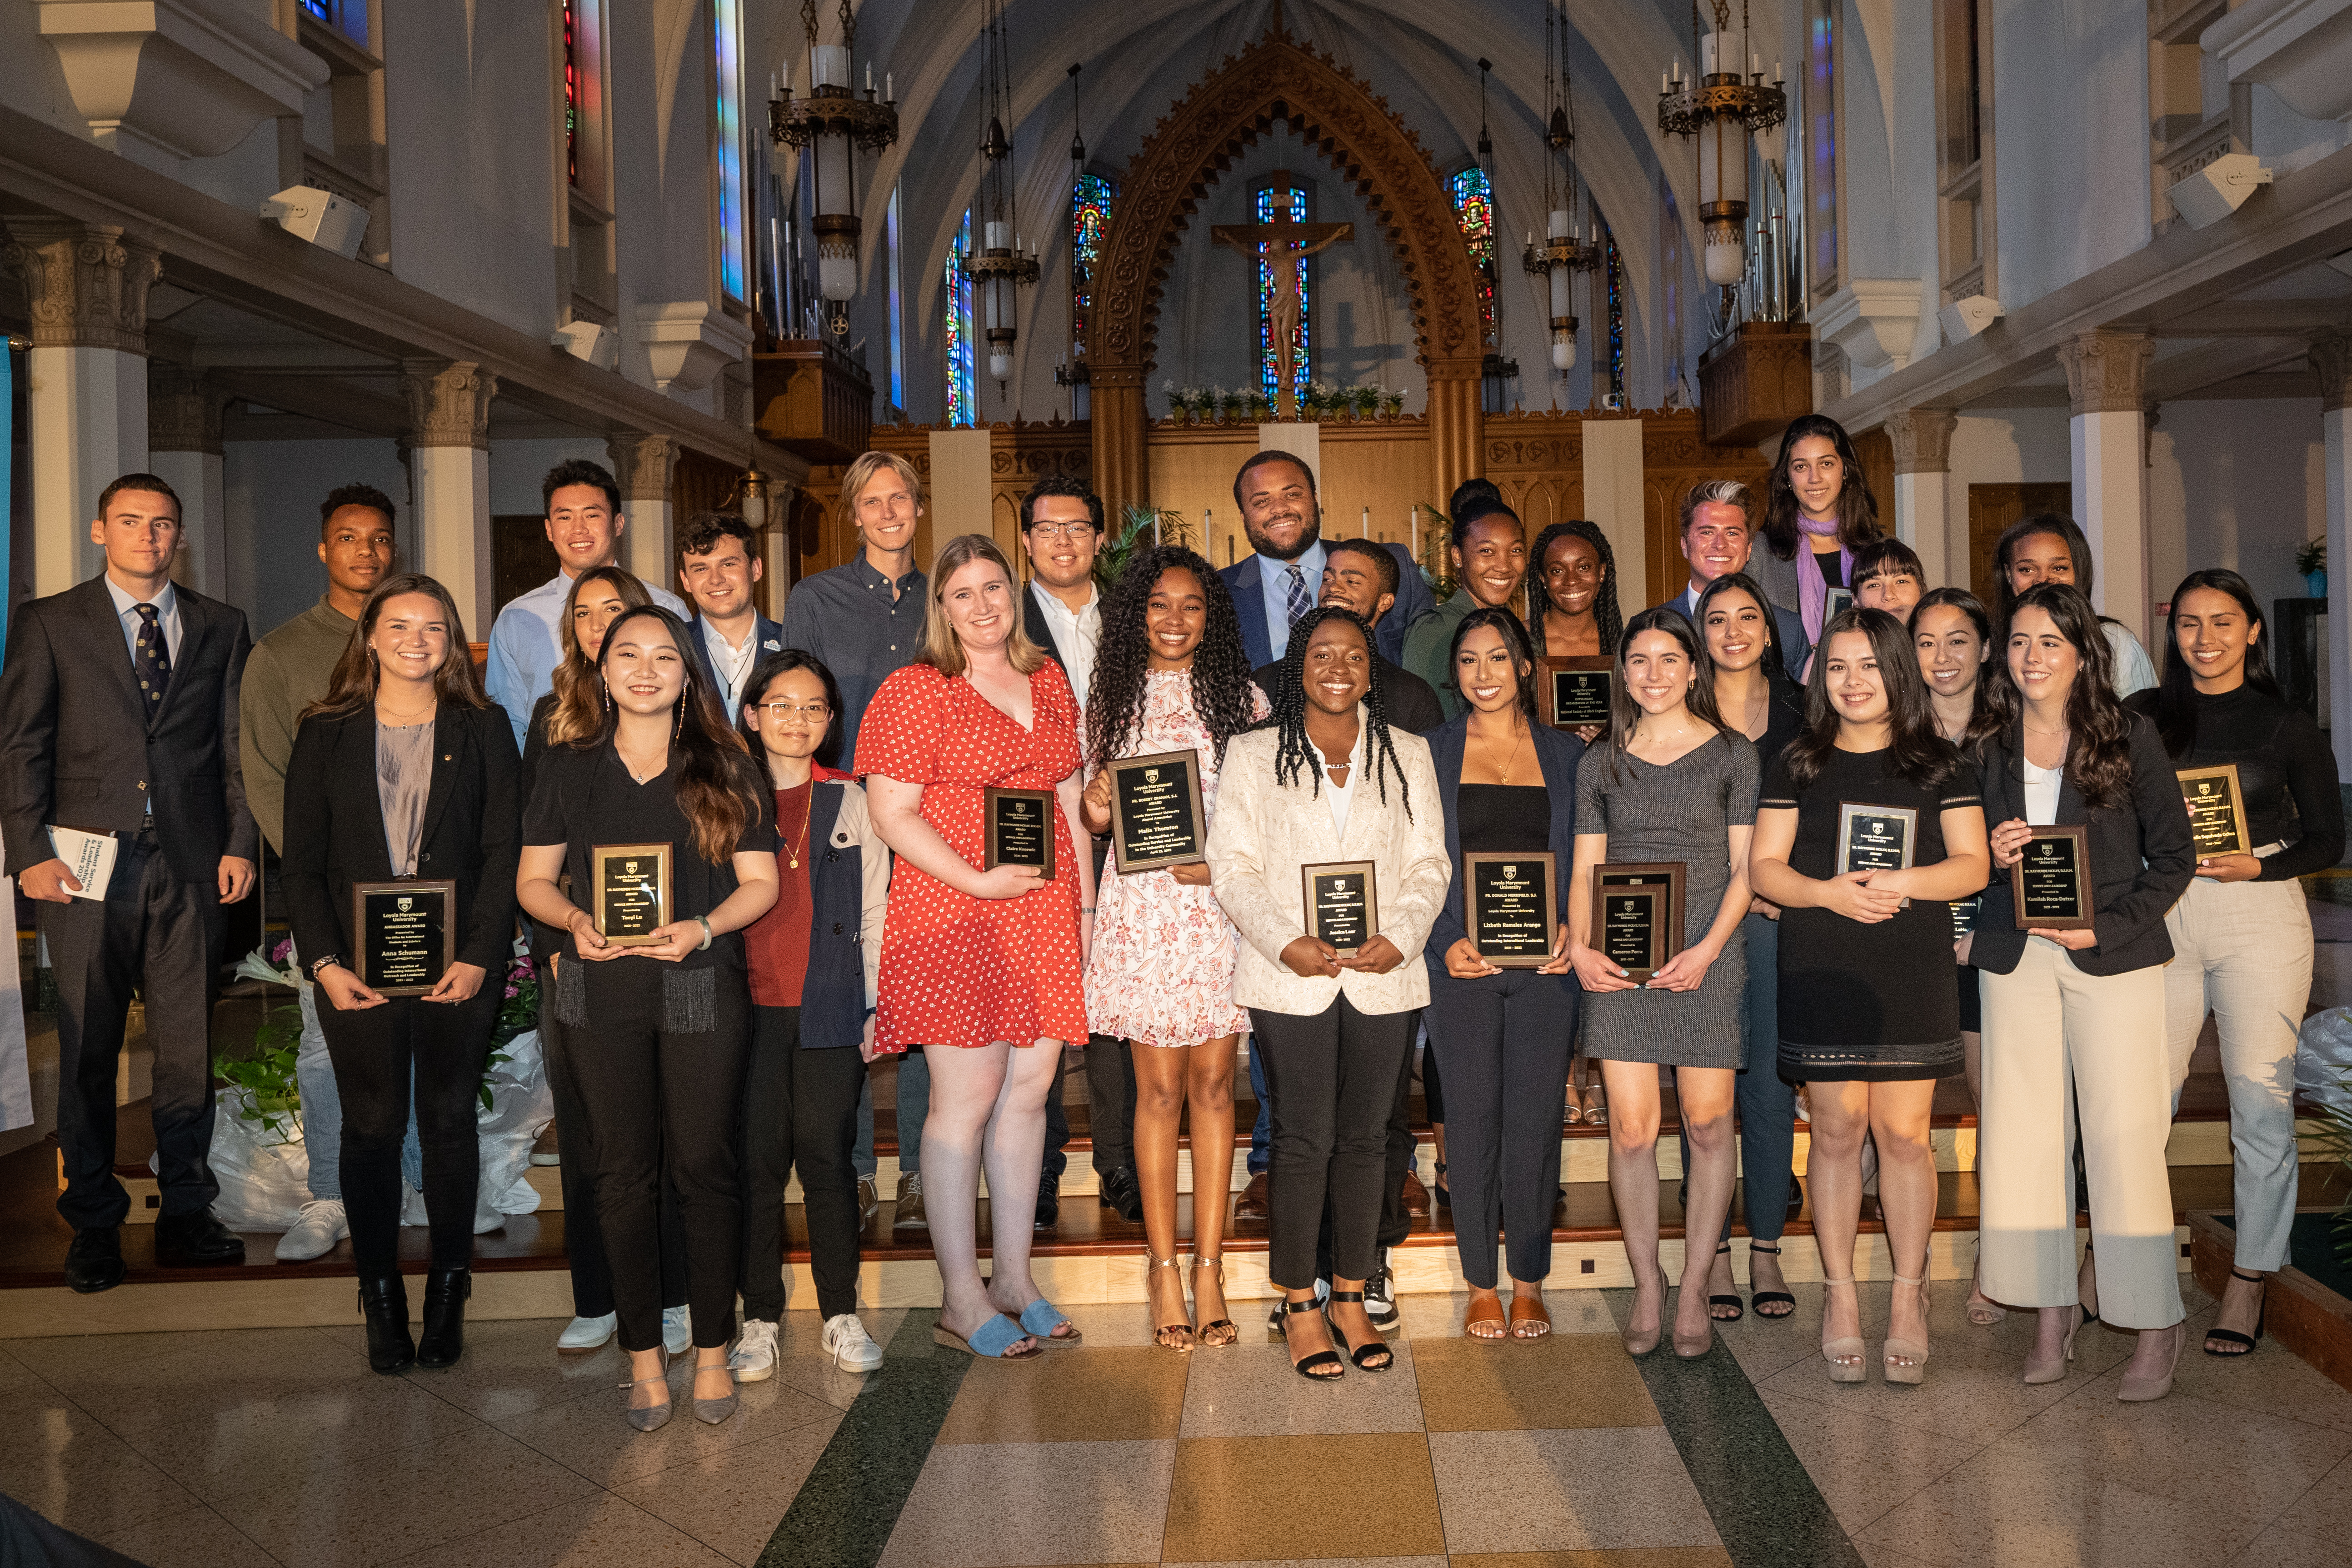 Senior students are standing inside the chapel on the altar steps smiling and holding award plaques.